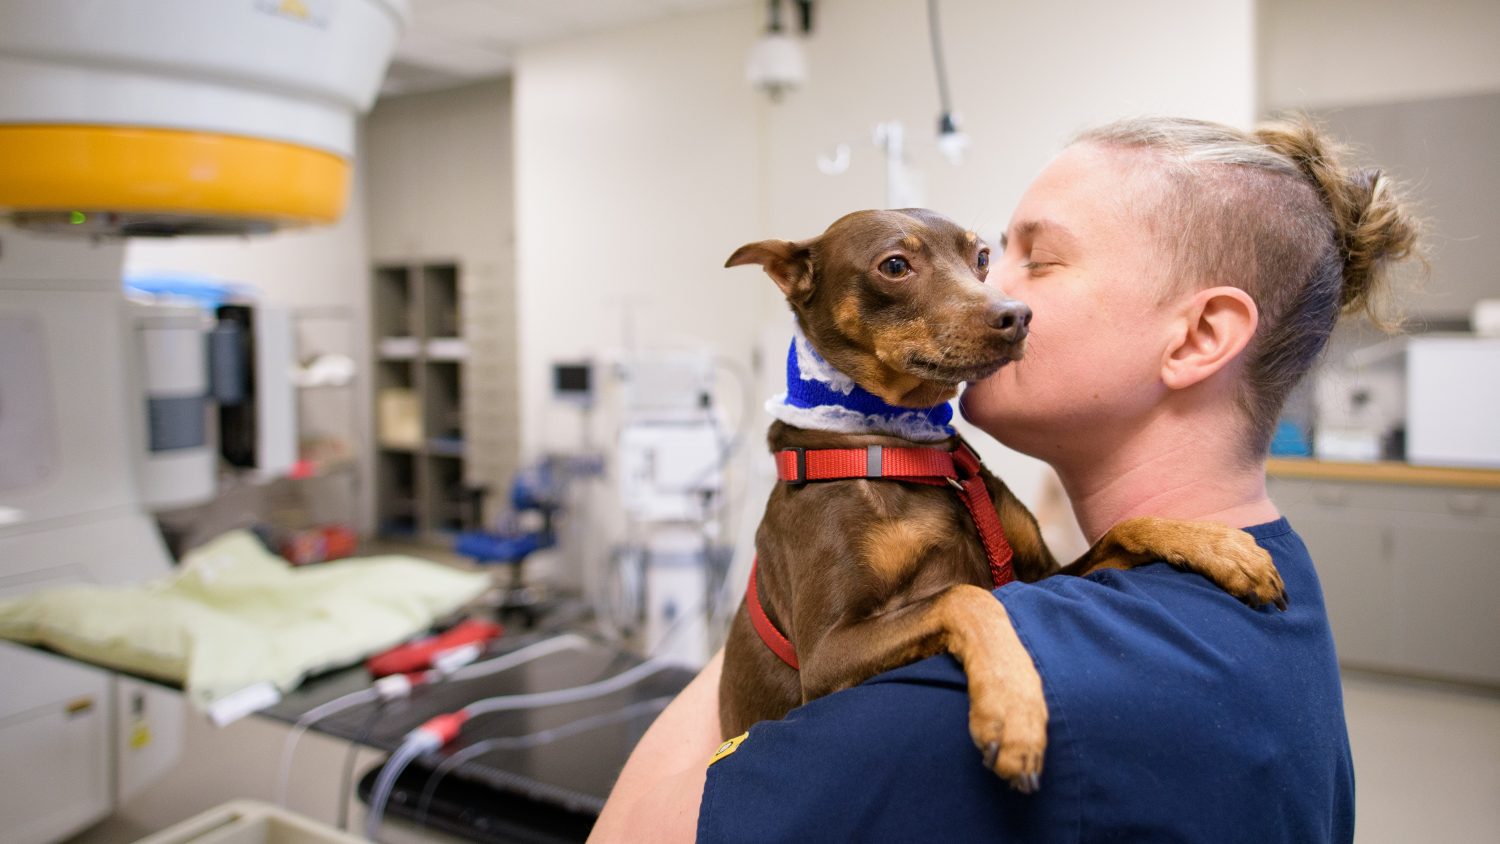 CVM staff comforts a small dog before treatment